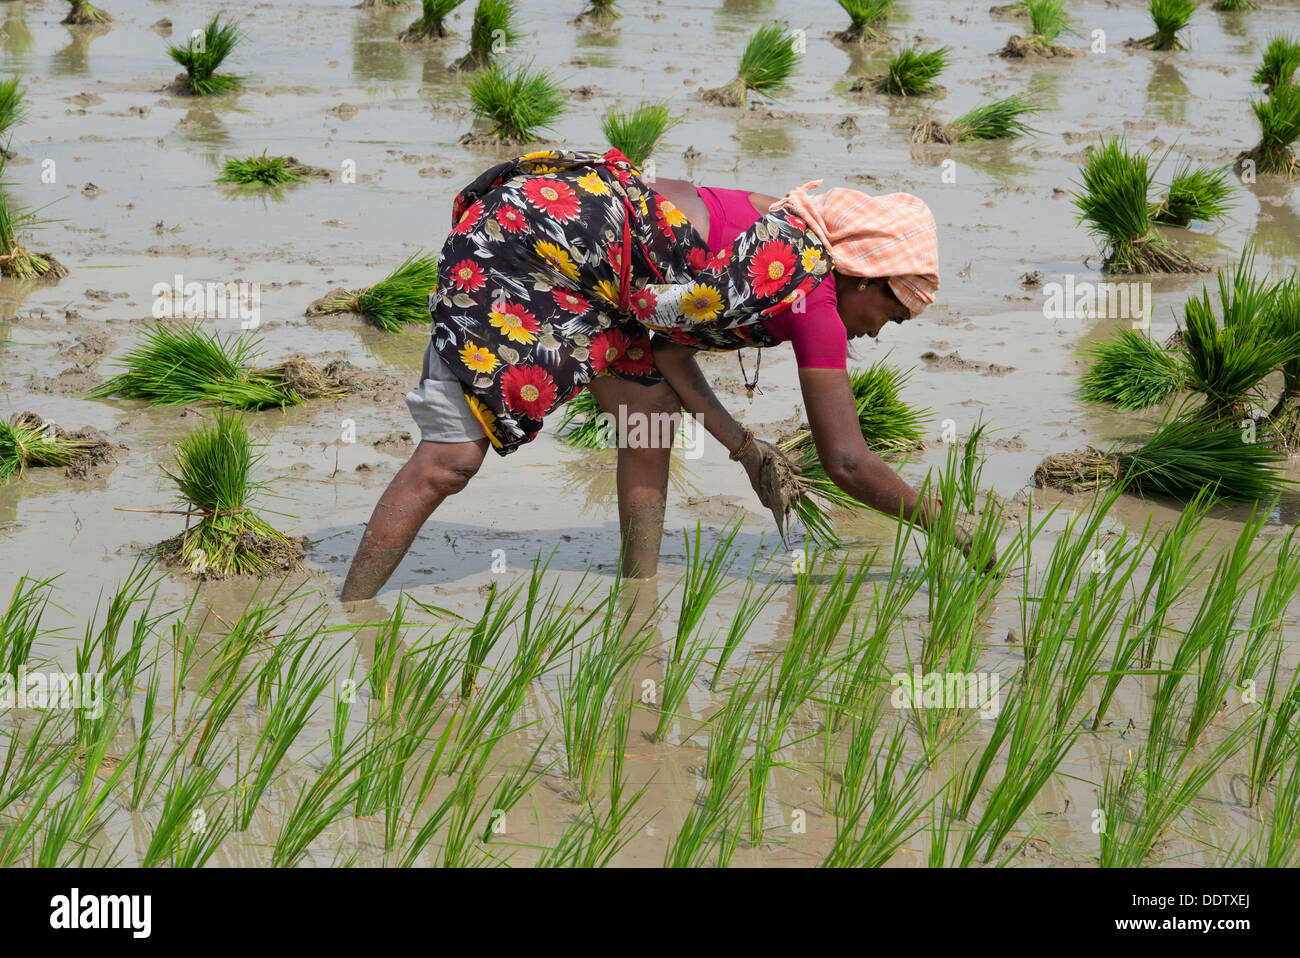 Indian woman planting young rice plants in a paddy field. Andhra Pradesh, India Stock Photo